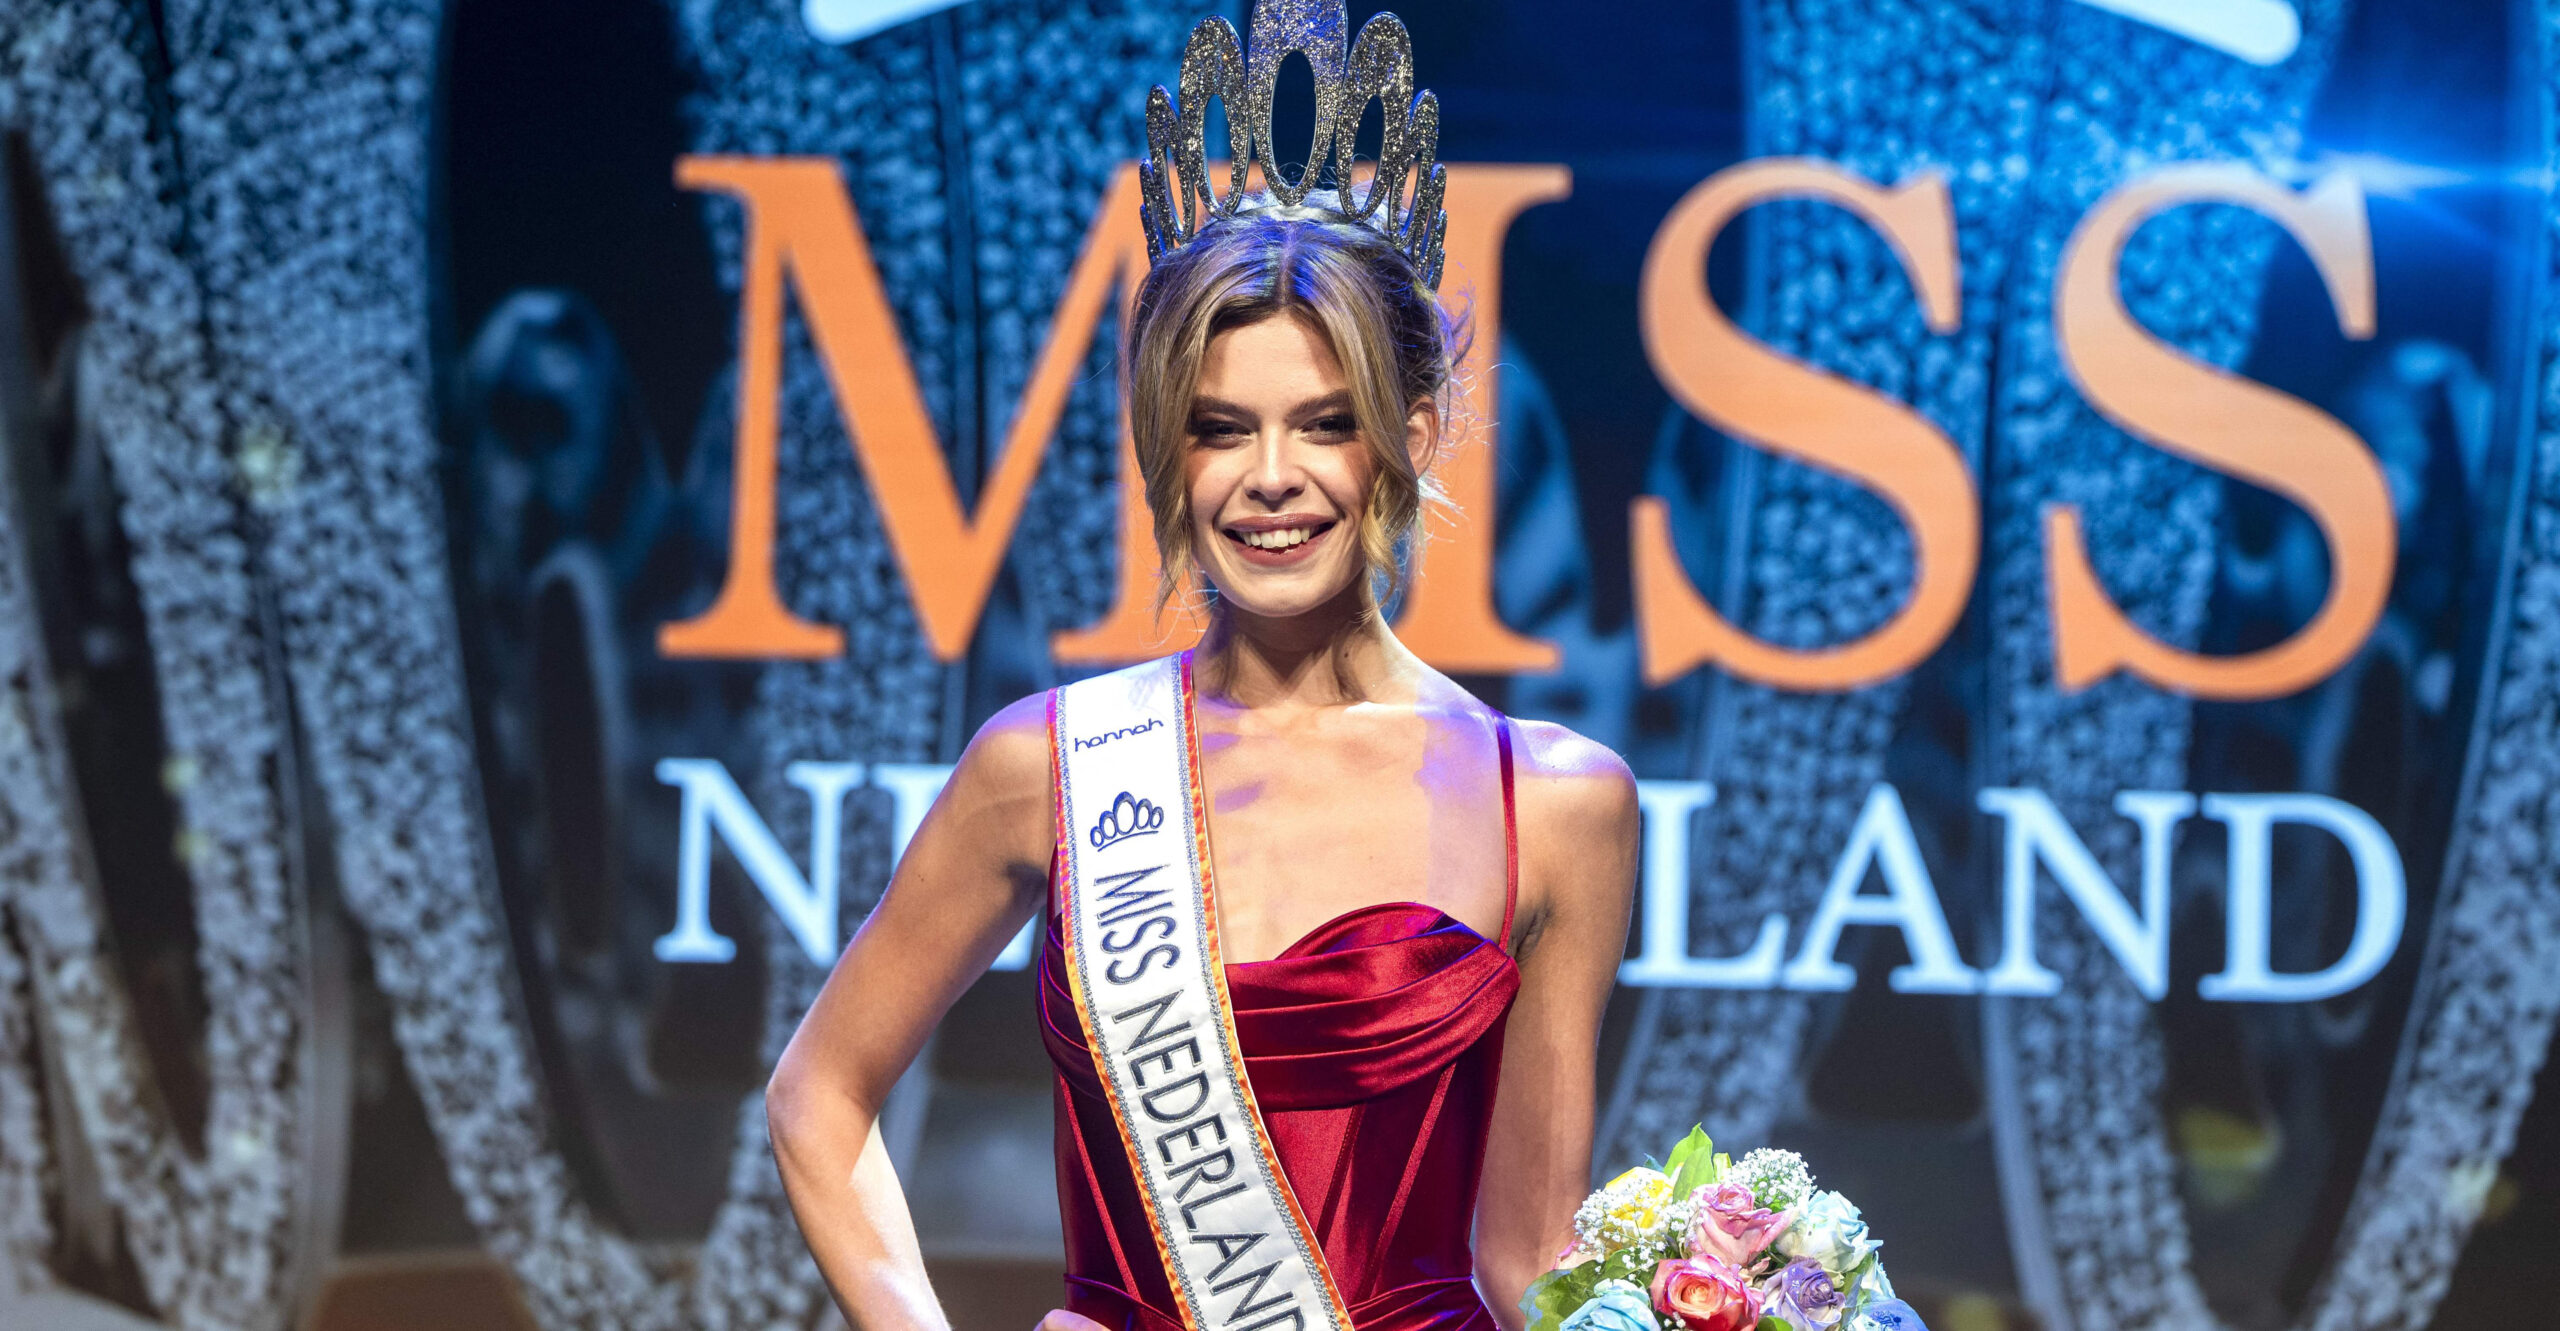 Transgender Model Wins Miss Universe Pageant in the Netherlands Long